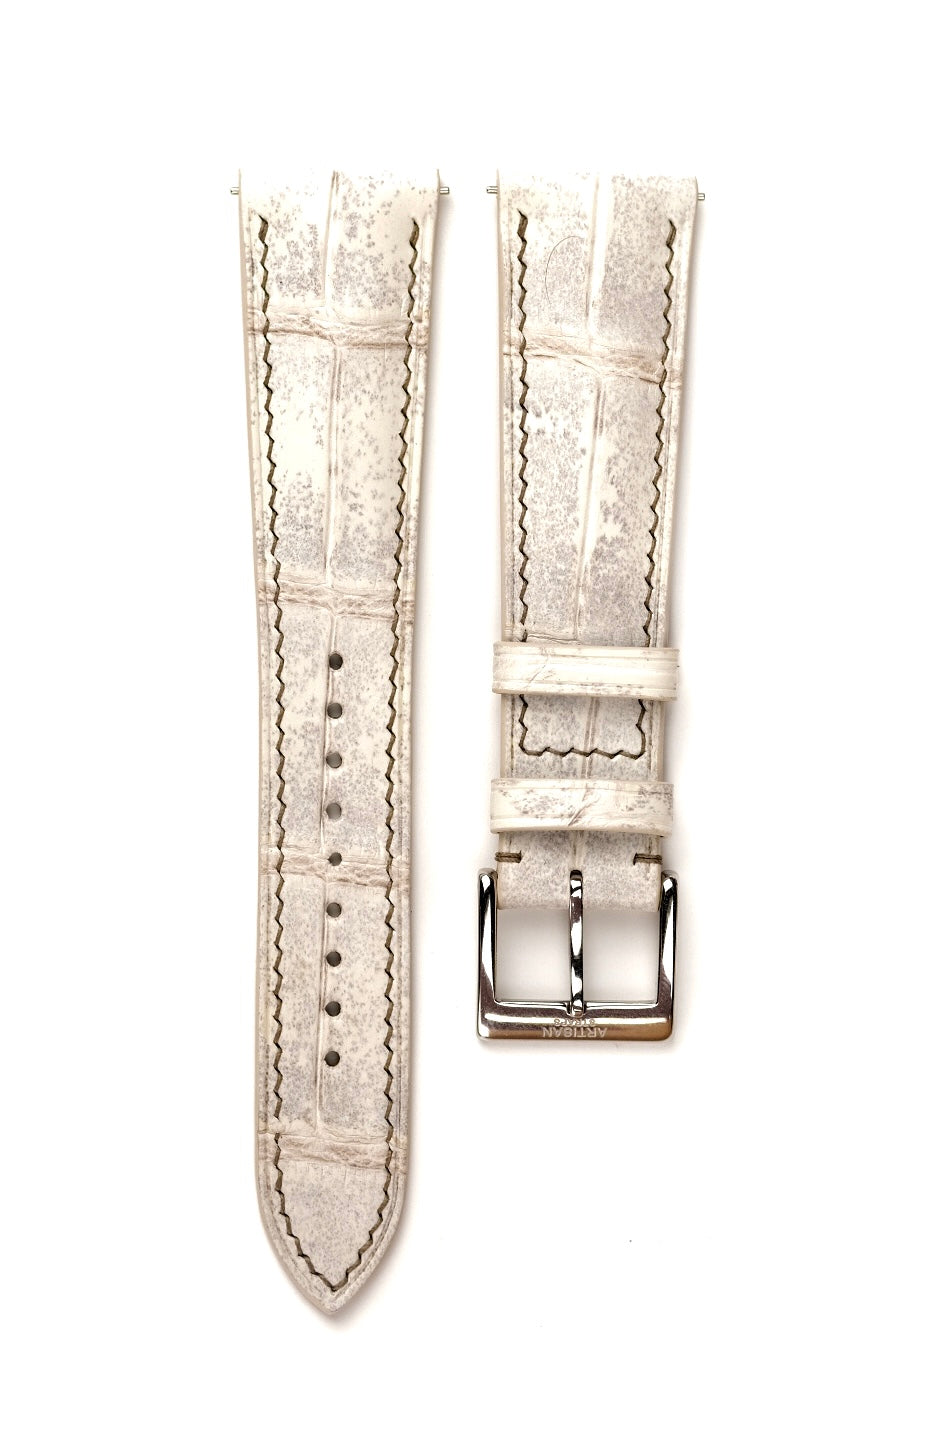 Handmade Handstitched Watch Strap In Natural Himalayan Crocodile